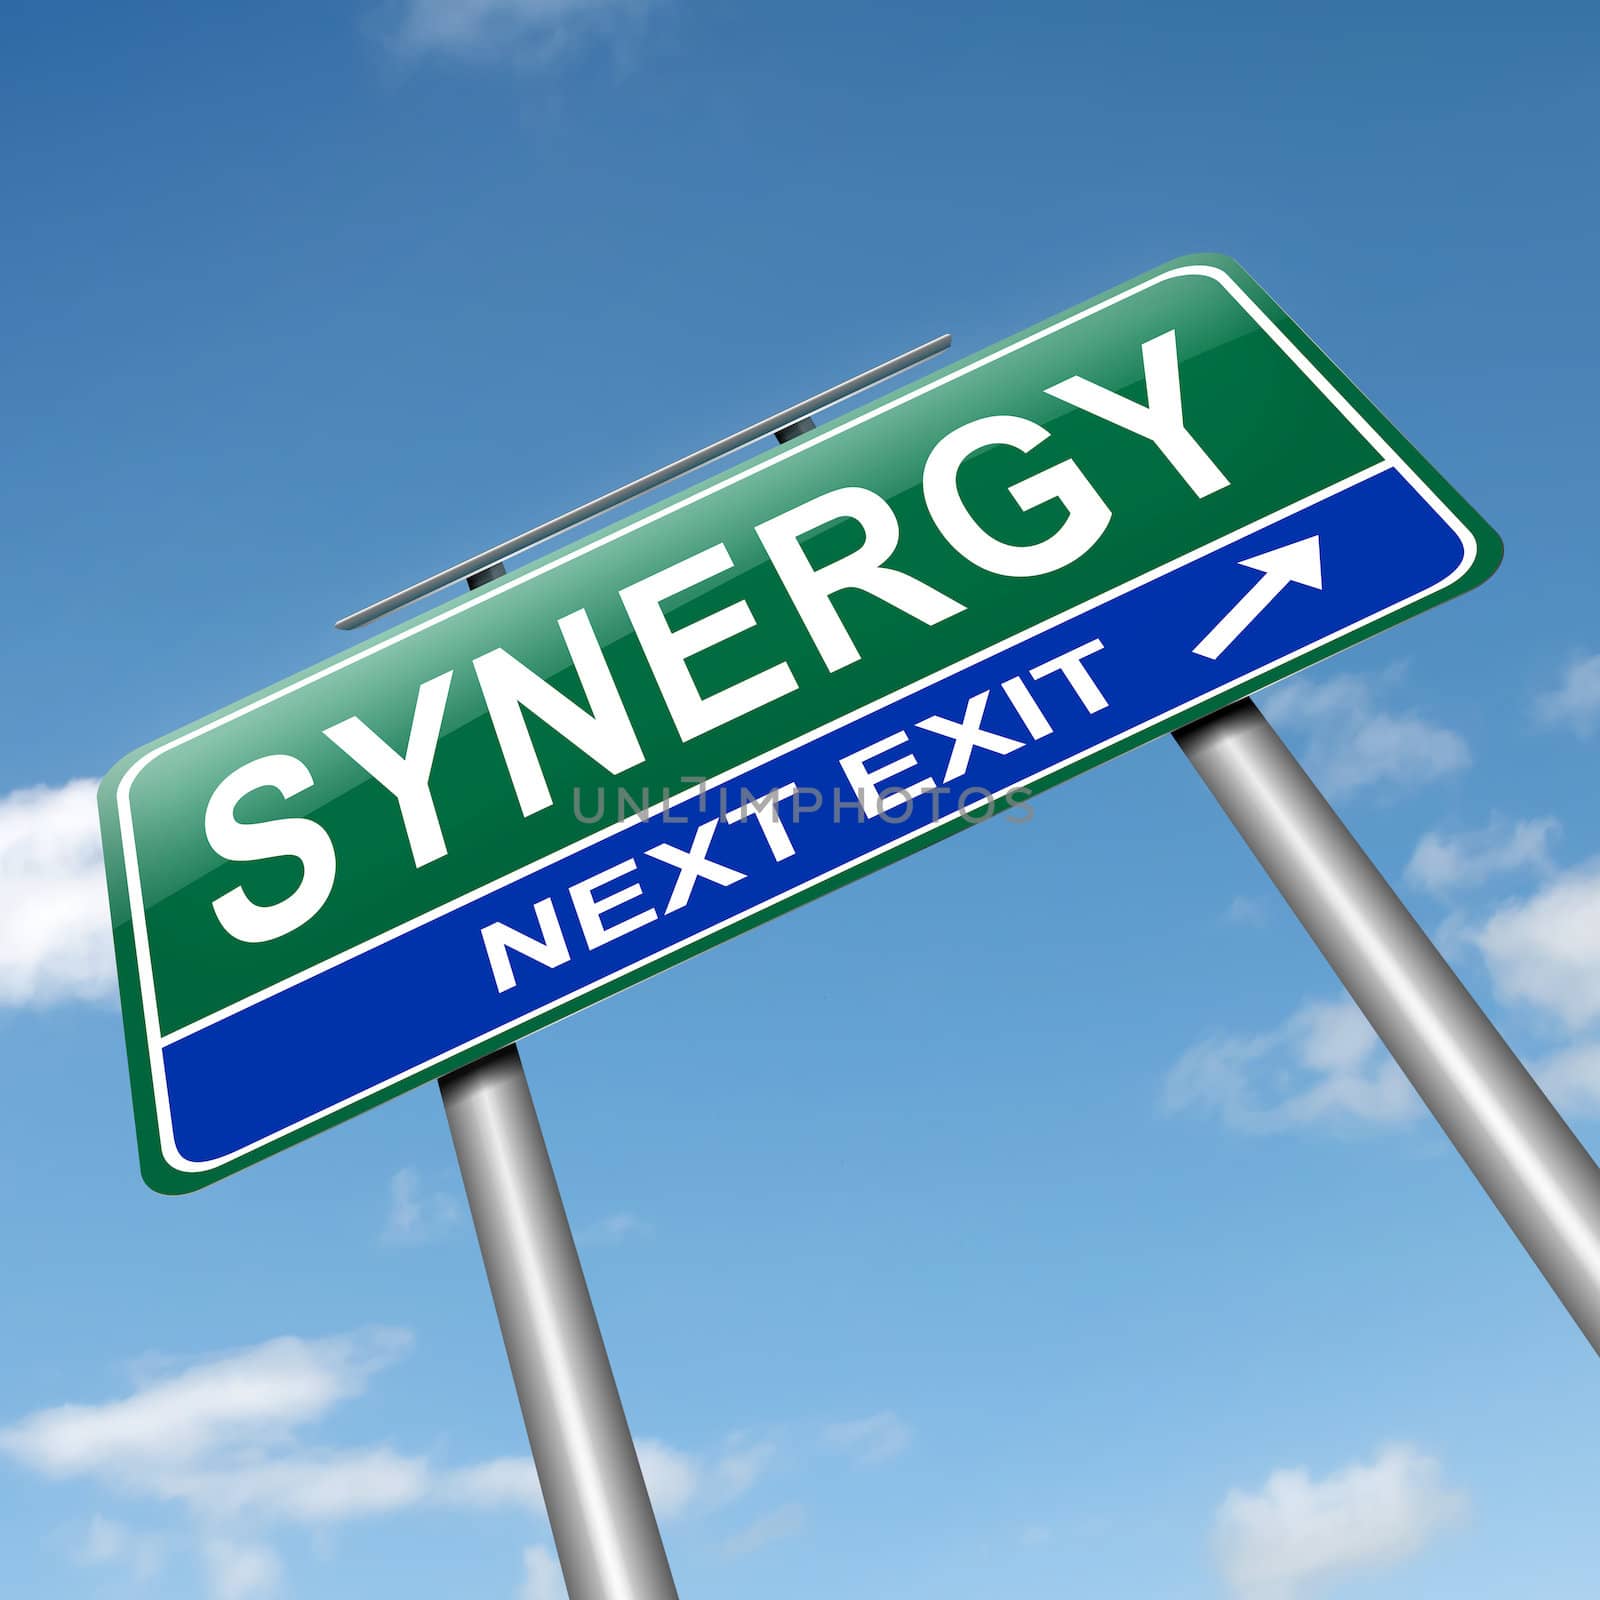 Illustration depicting a roadsign with synergy concept. Sky background.